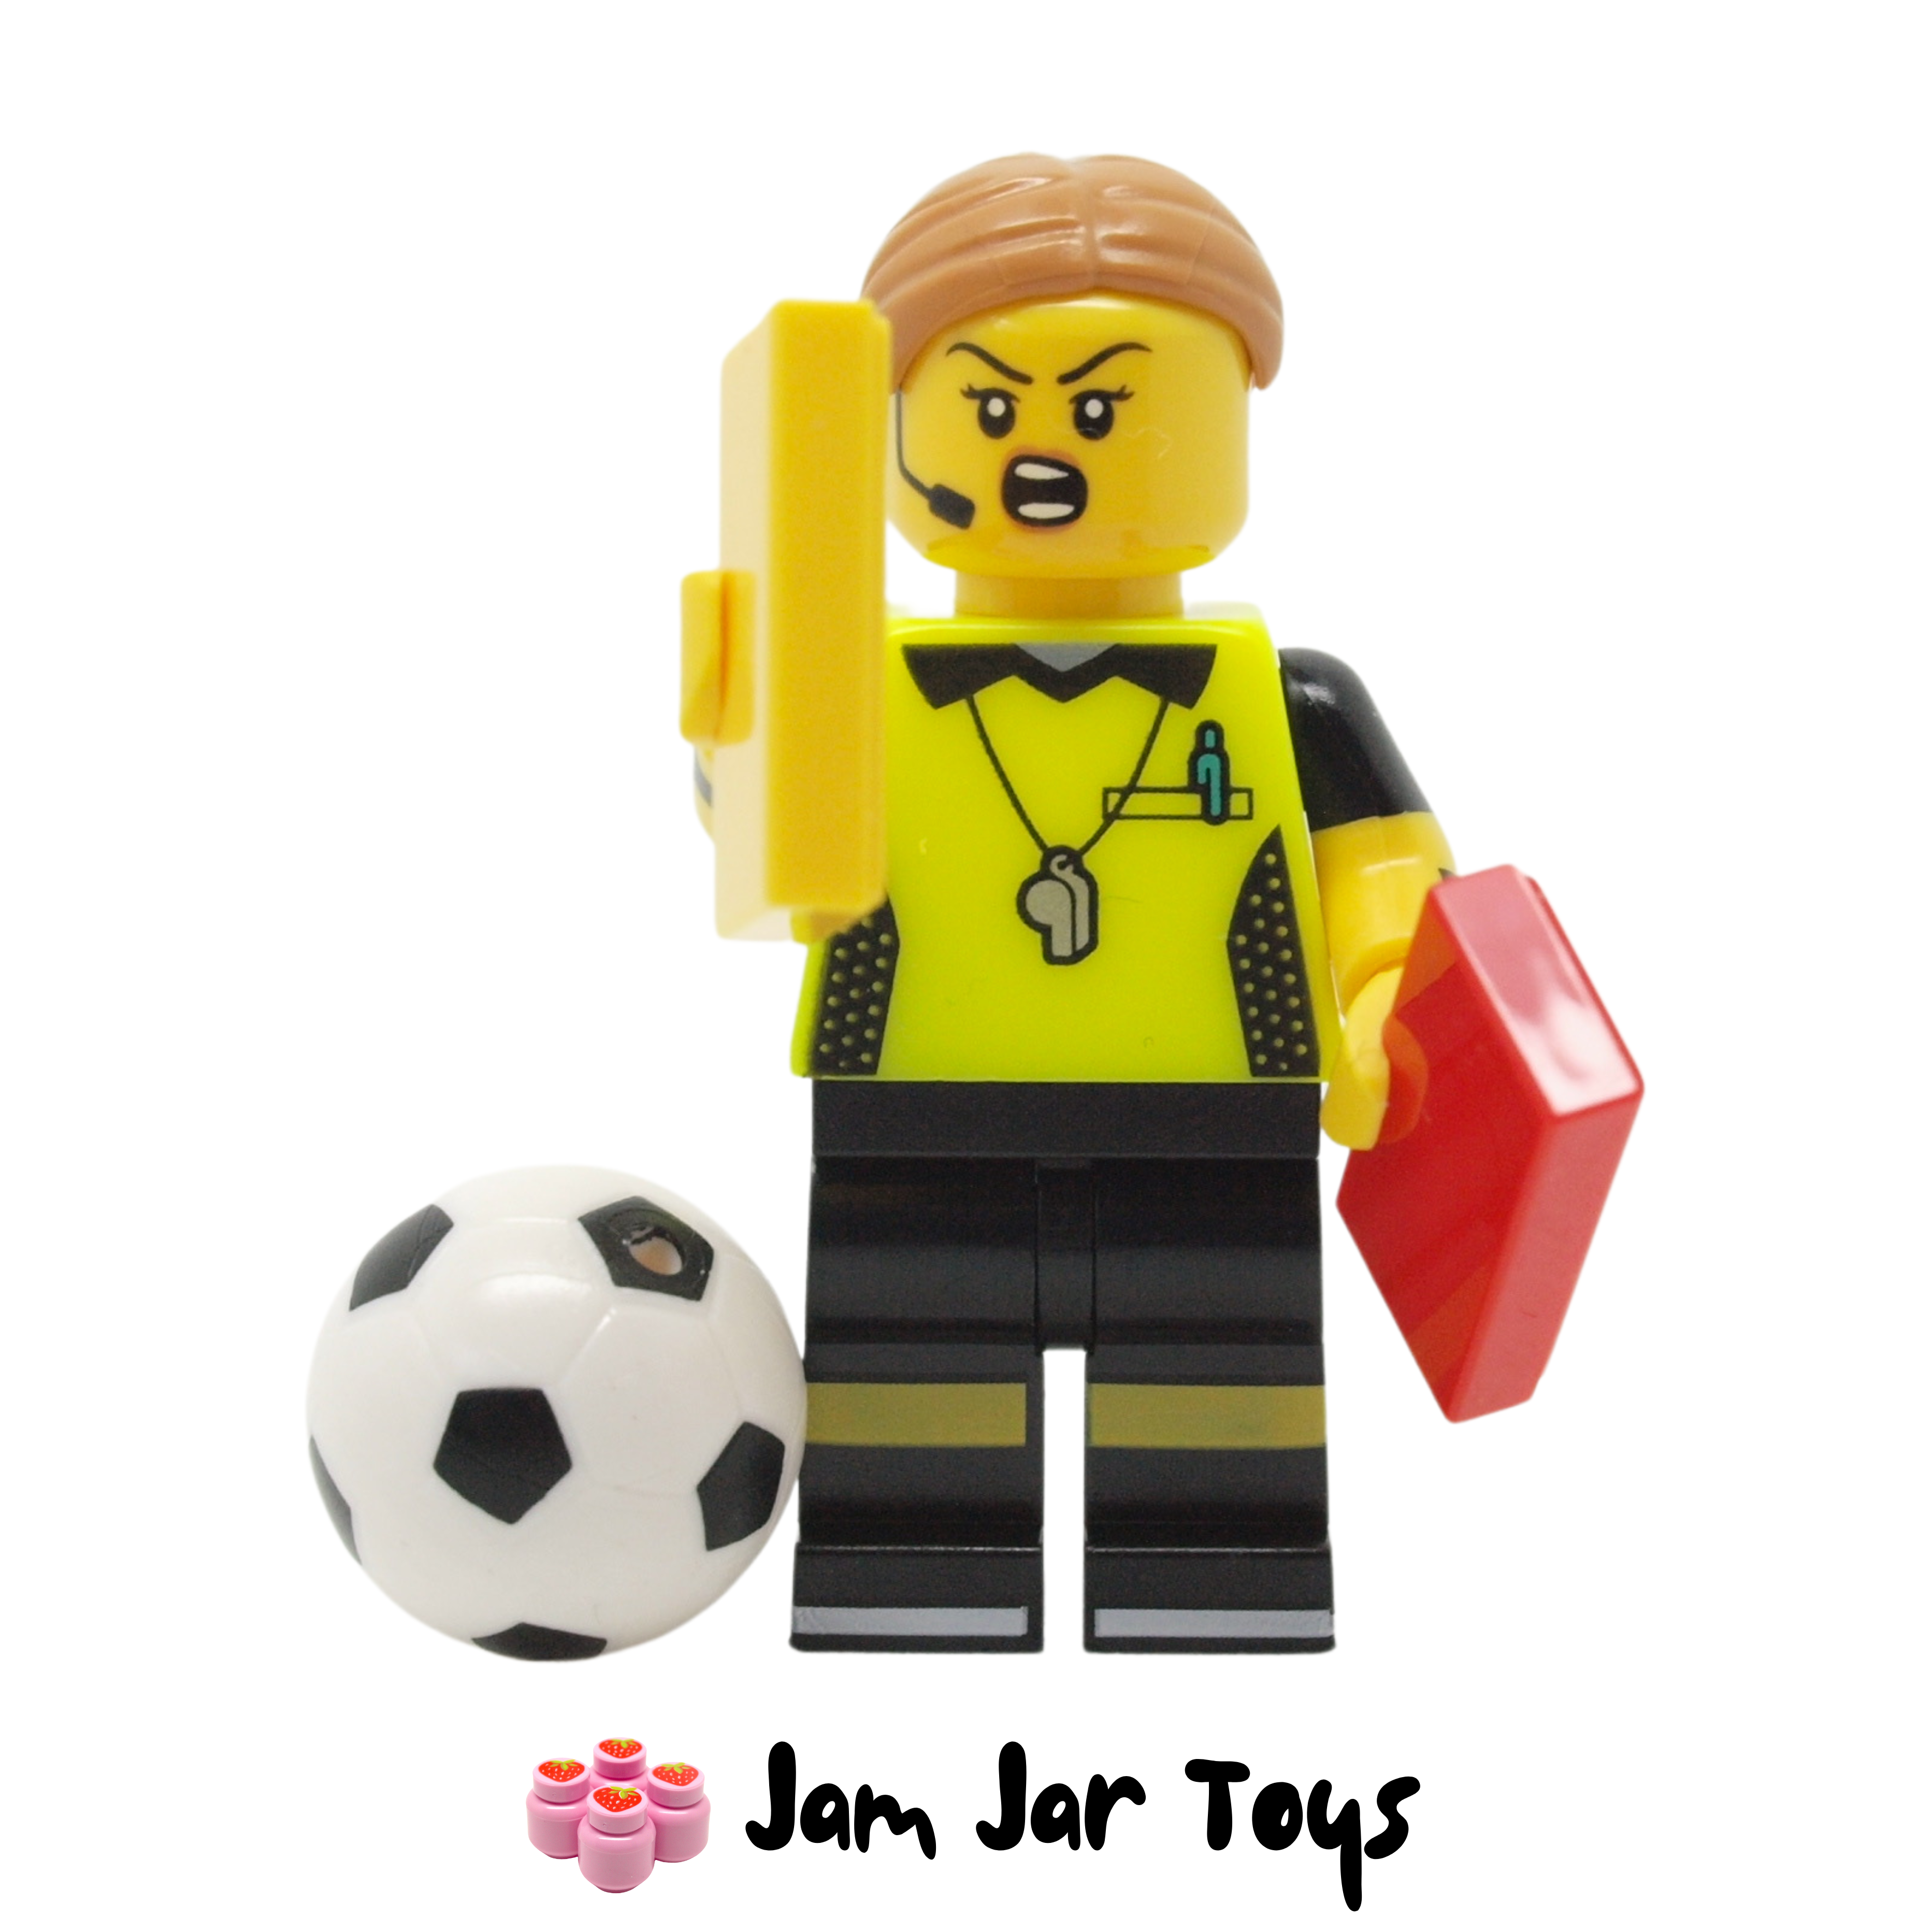 LEGO Minifigure Series 24 Football Referee with Soccer Ball # 71037